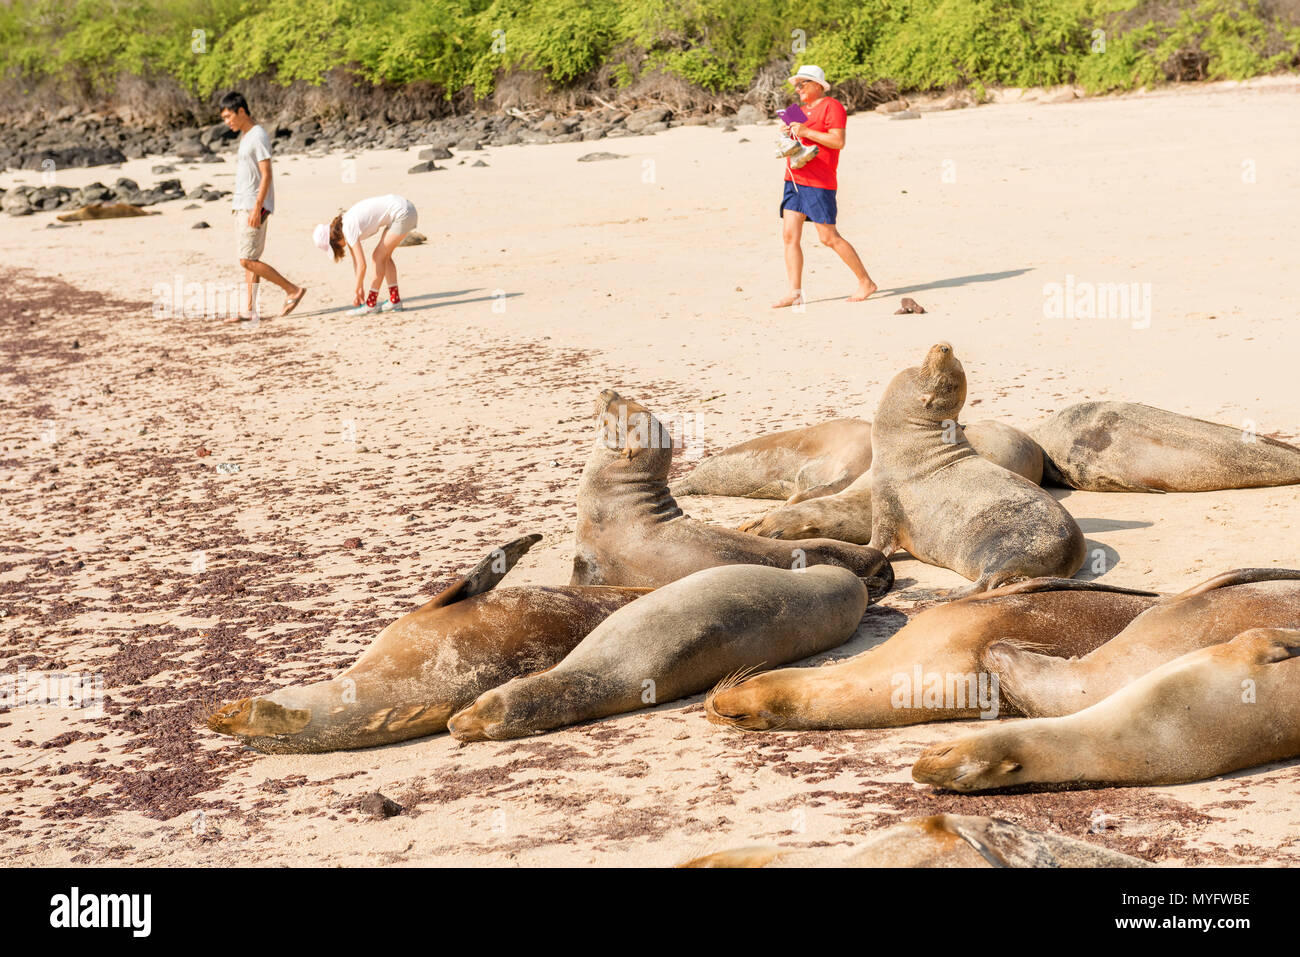 Santa Fe ISland, Galapagos, Ecuador - April 9, 2016: Tourists are passing by a colony of sea lions sleeping on the beach. Stock Photo